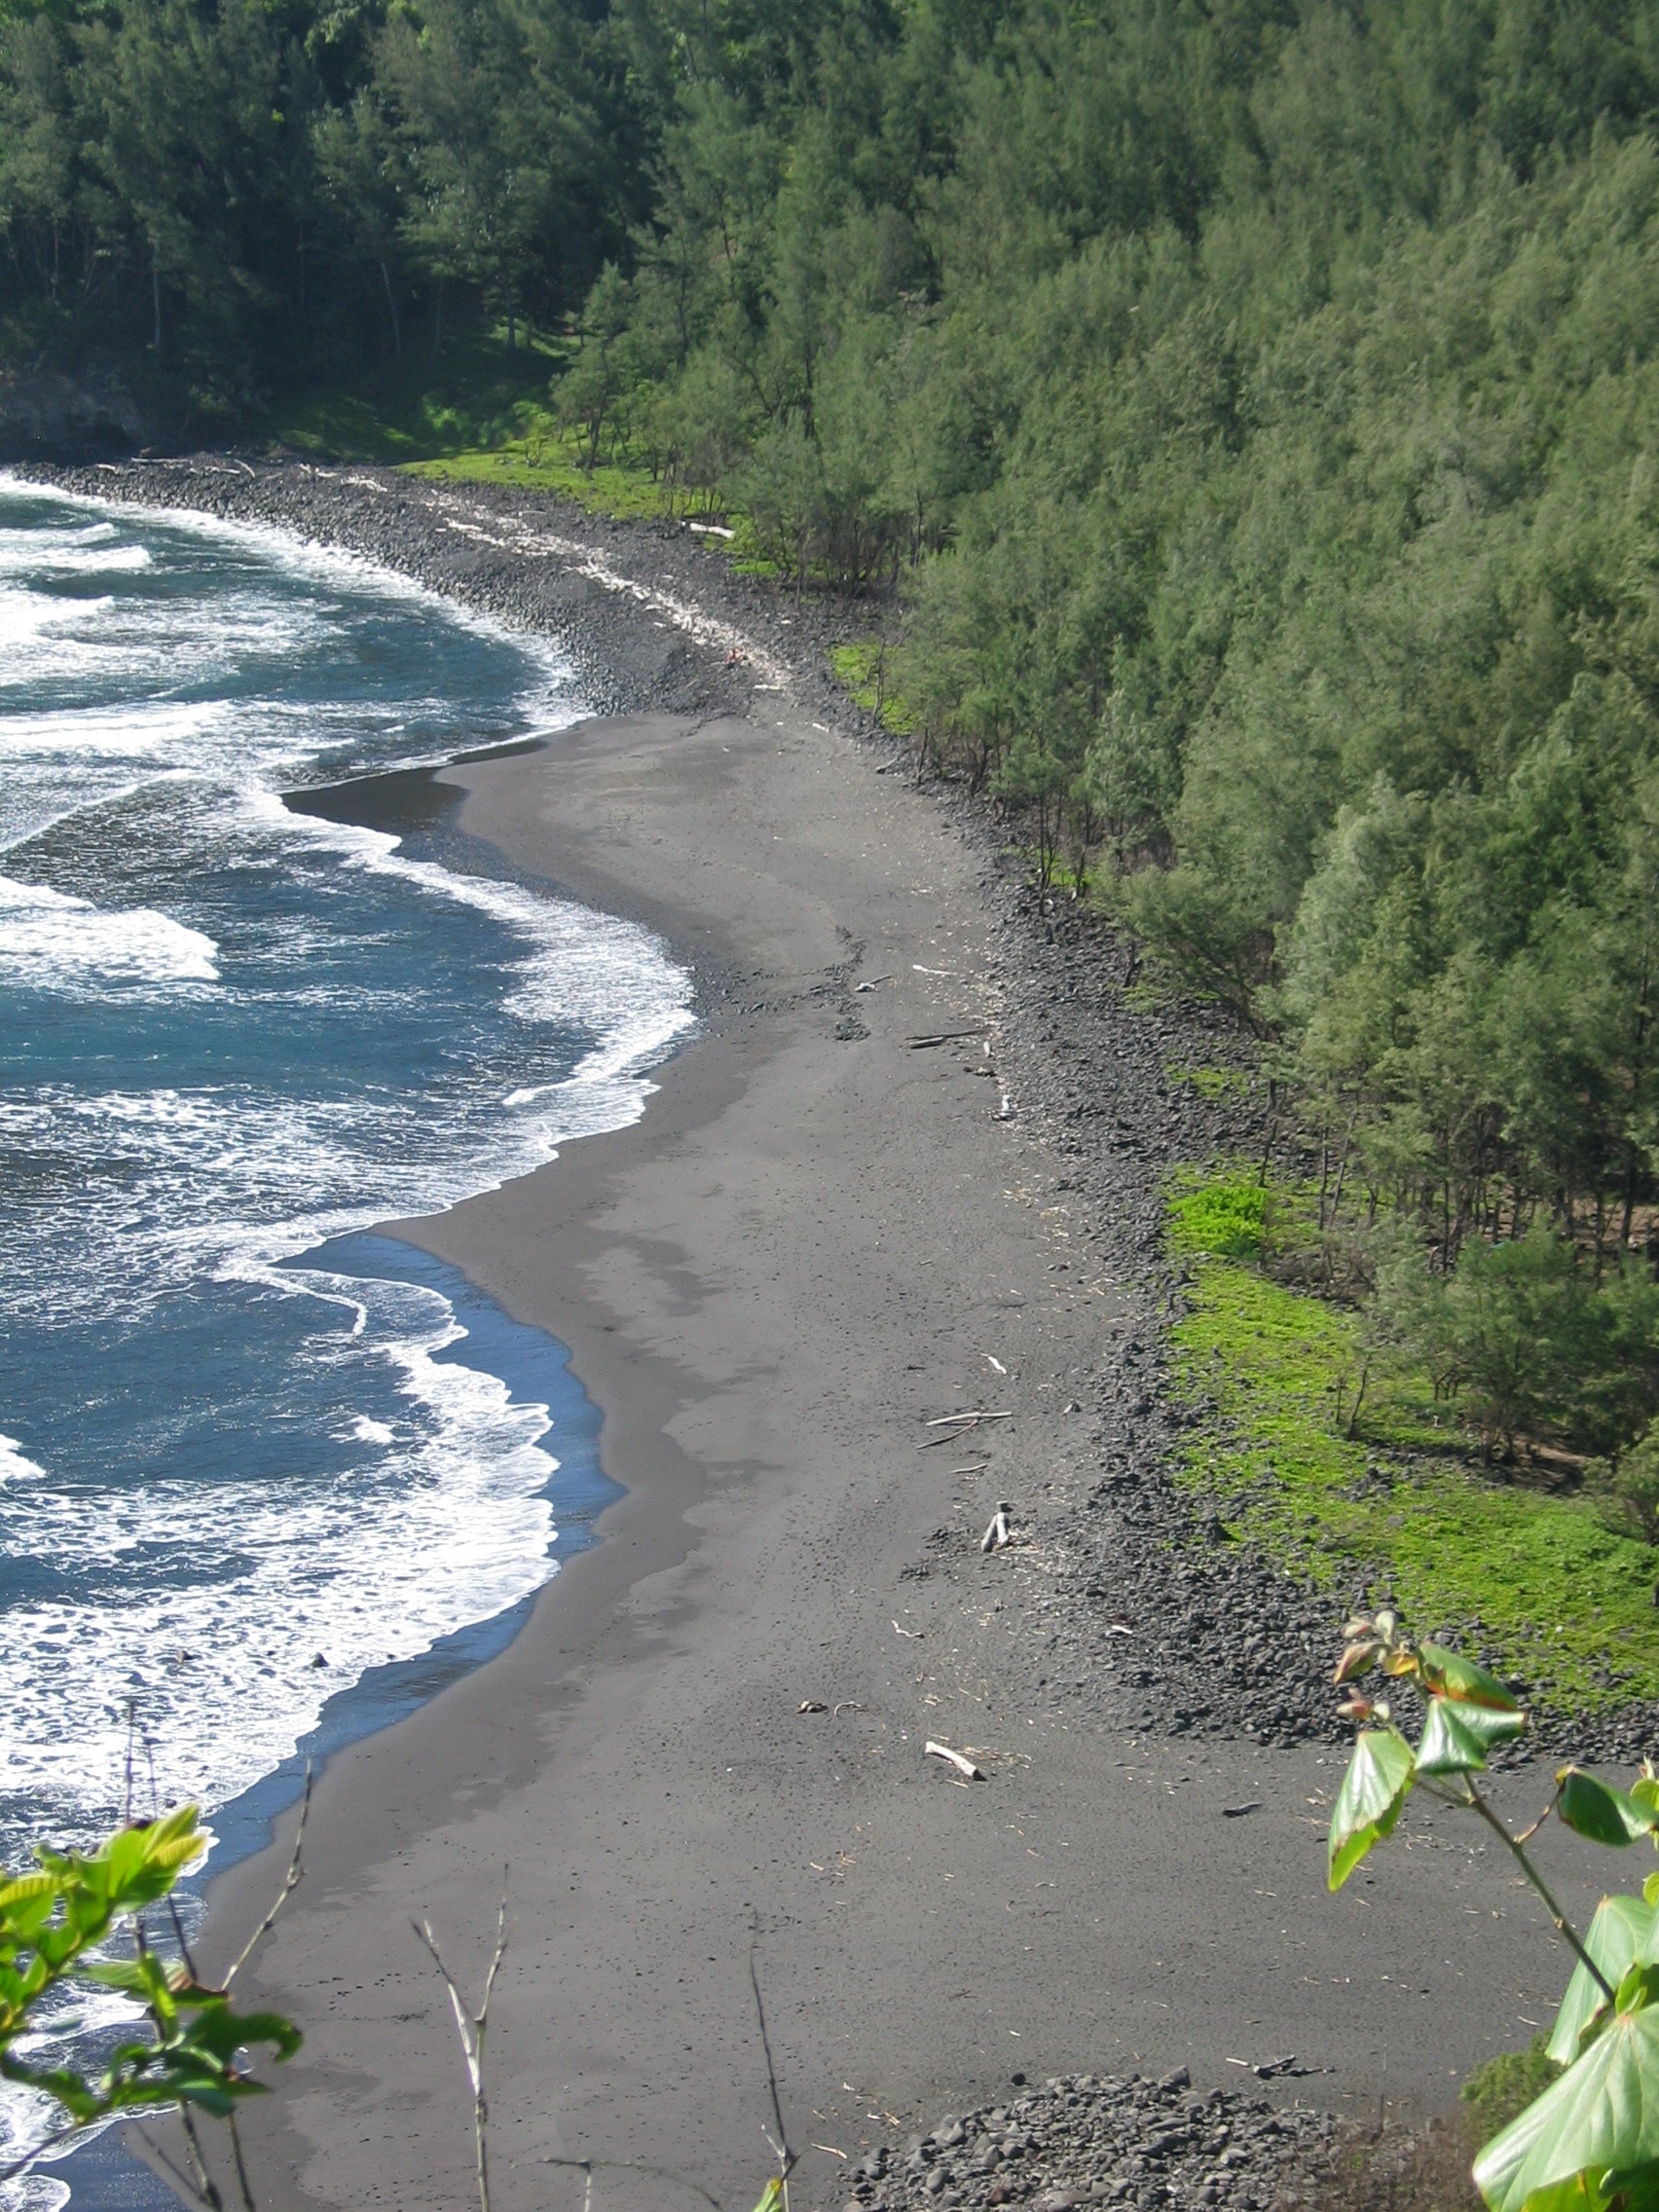 Overview of pololu